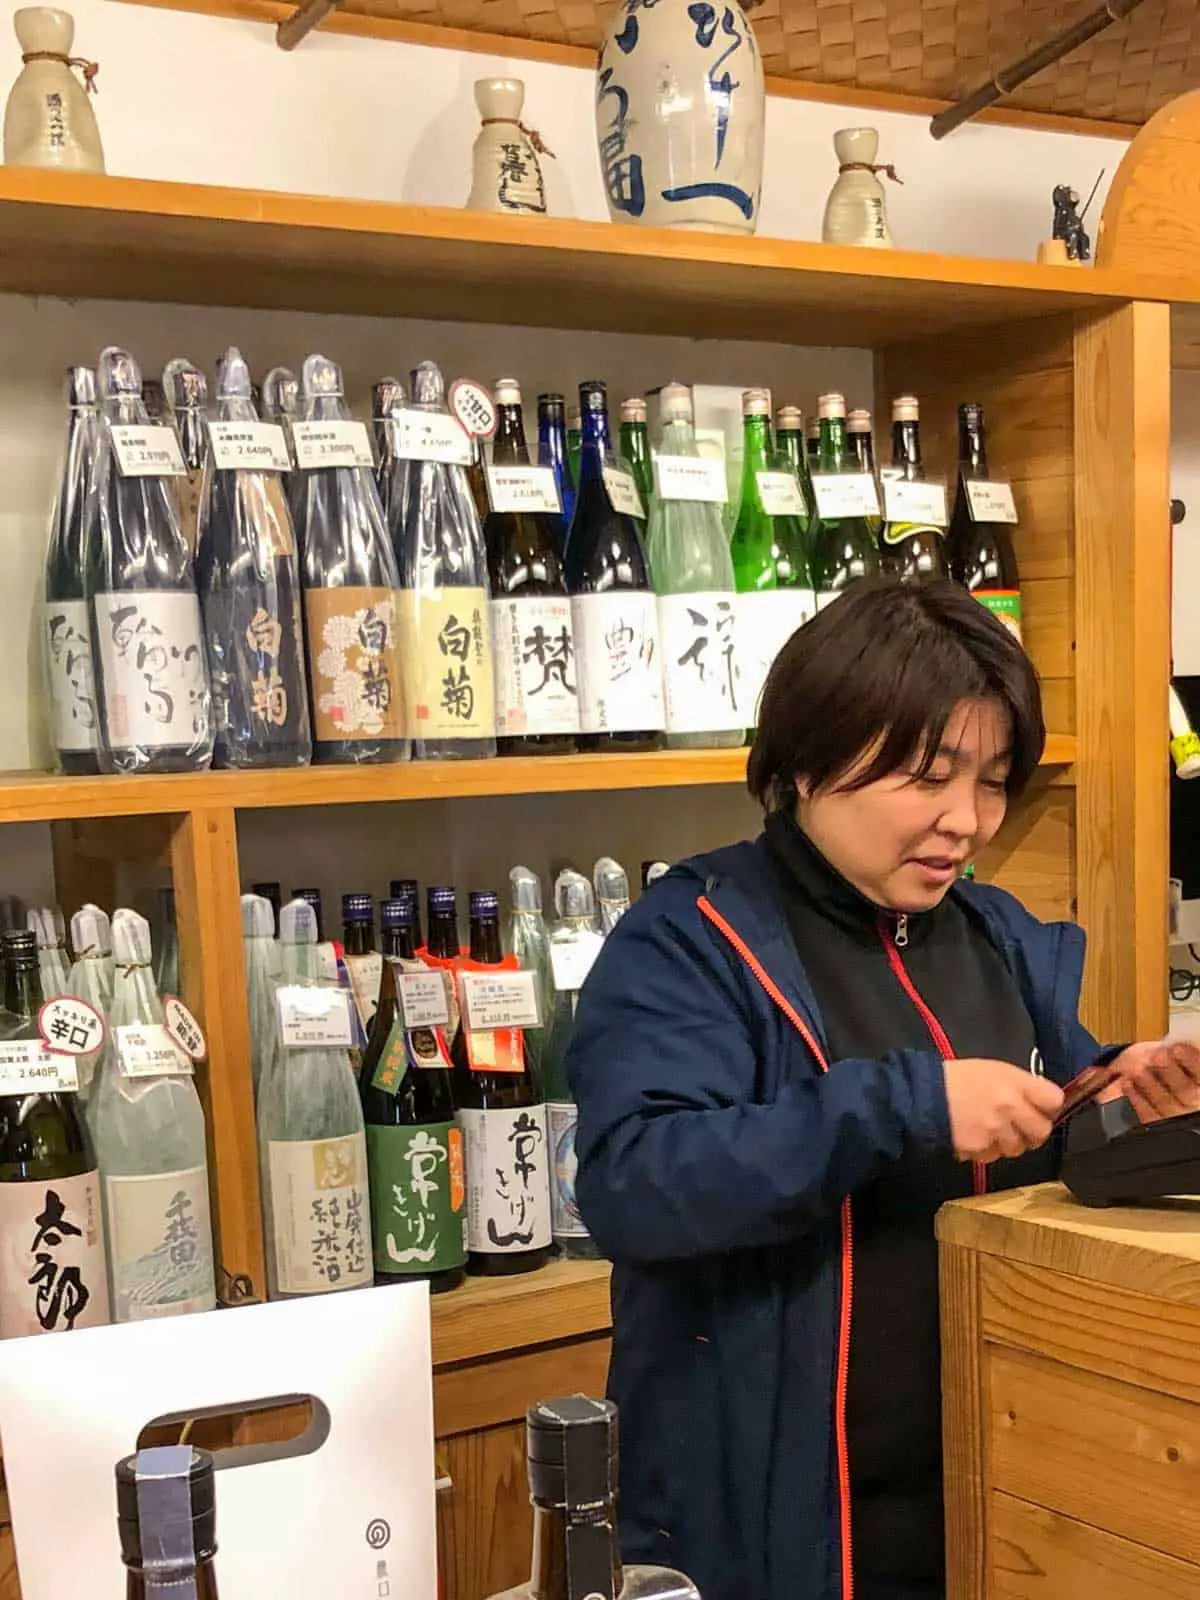 A woman in a shop that sells sake. There are many different bottles of sake on shelves in the shop.